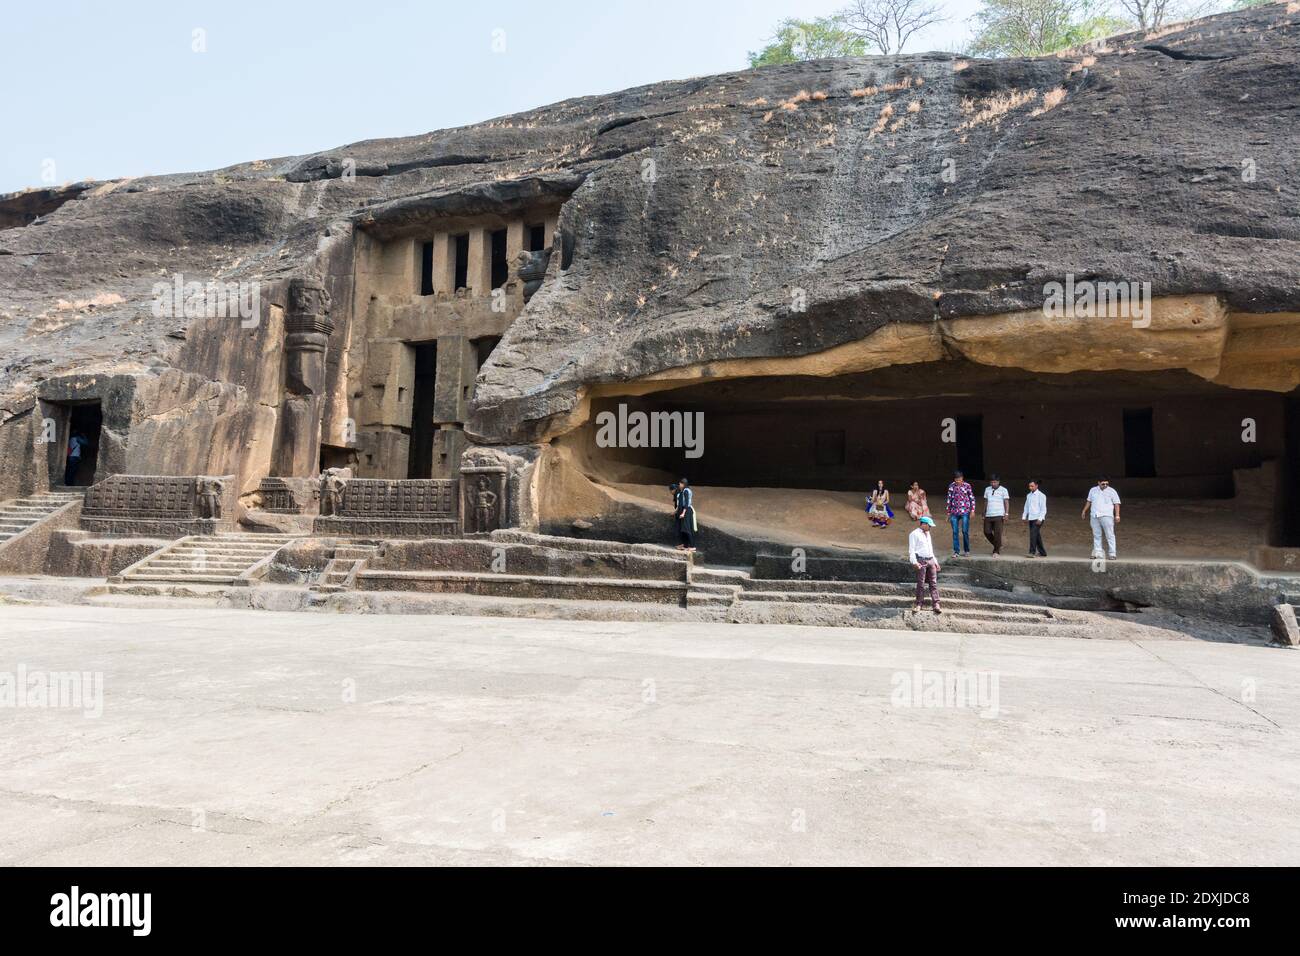 Visitors visiting Kanheri cave complex, which is situated inside the Sanjay Gandhi National Park in the Borivali region of Mumbai, Indian Stock Photo